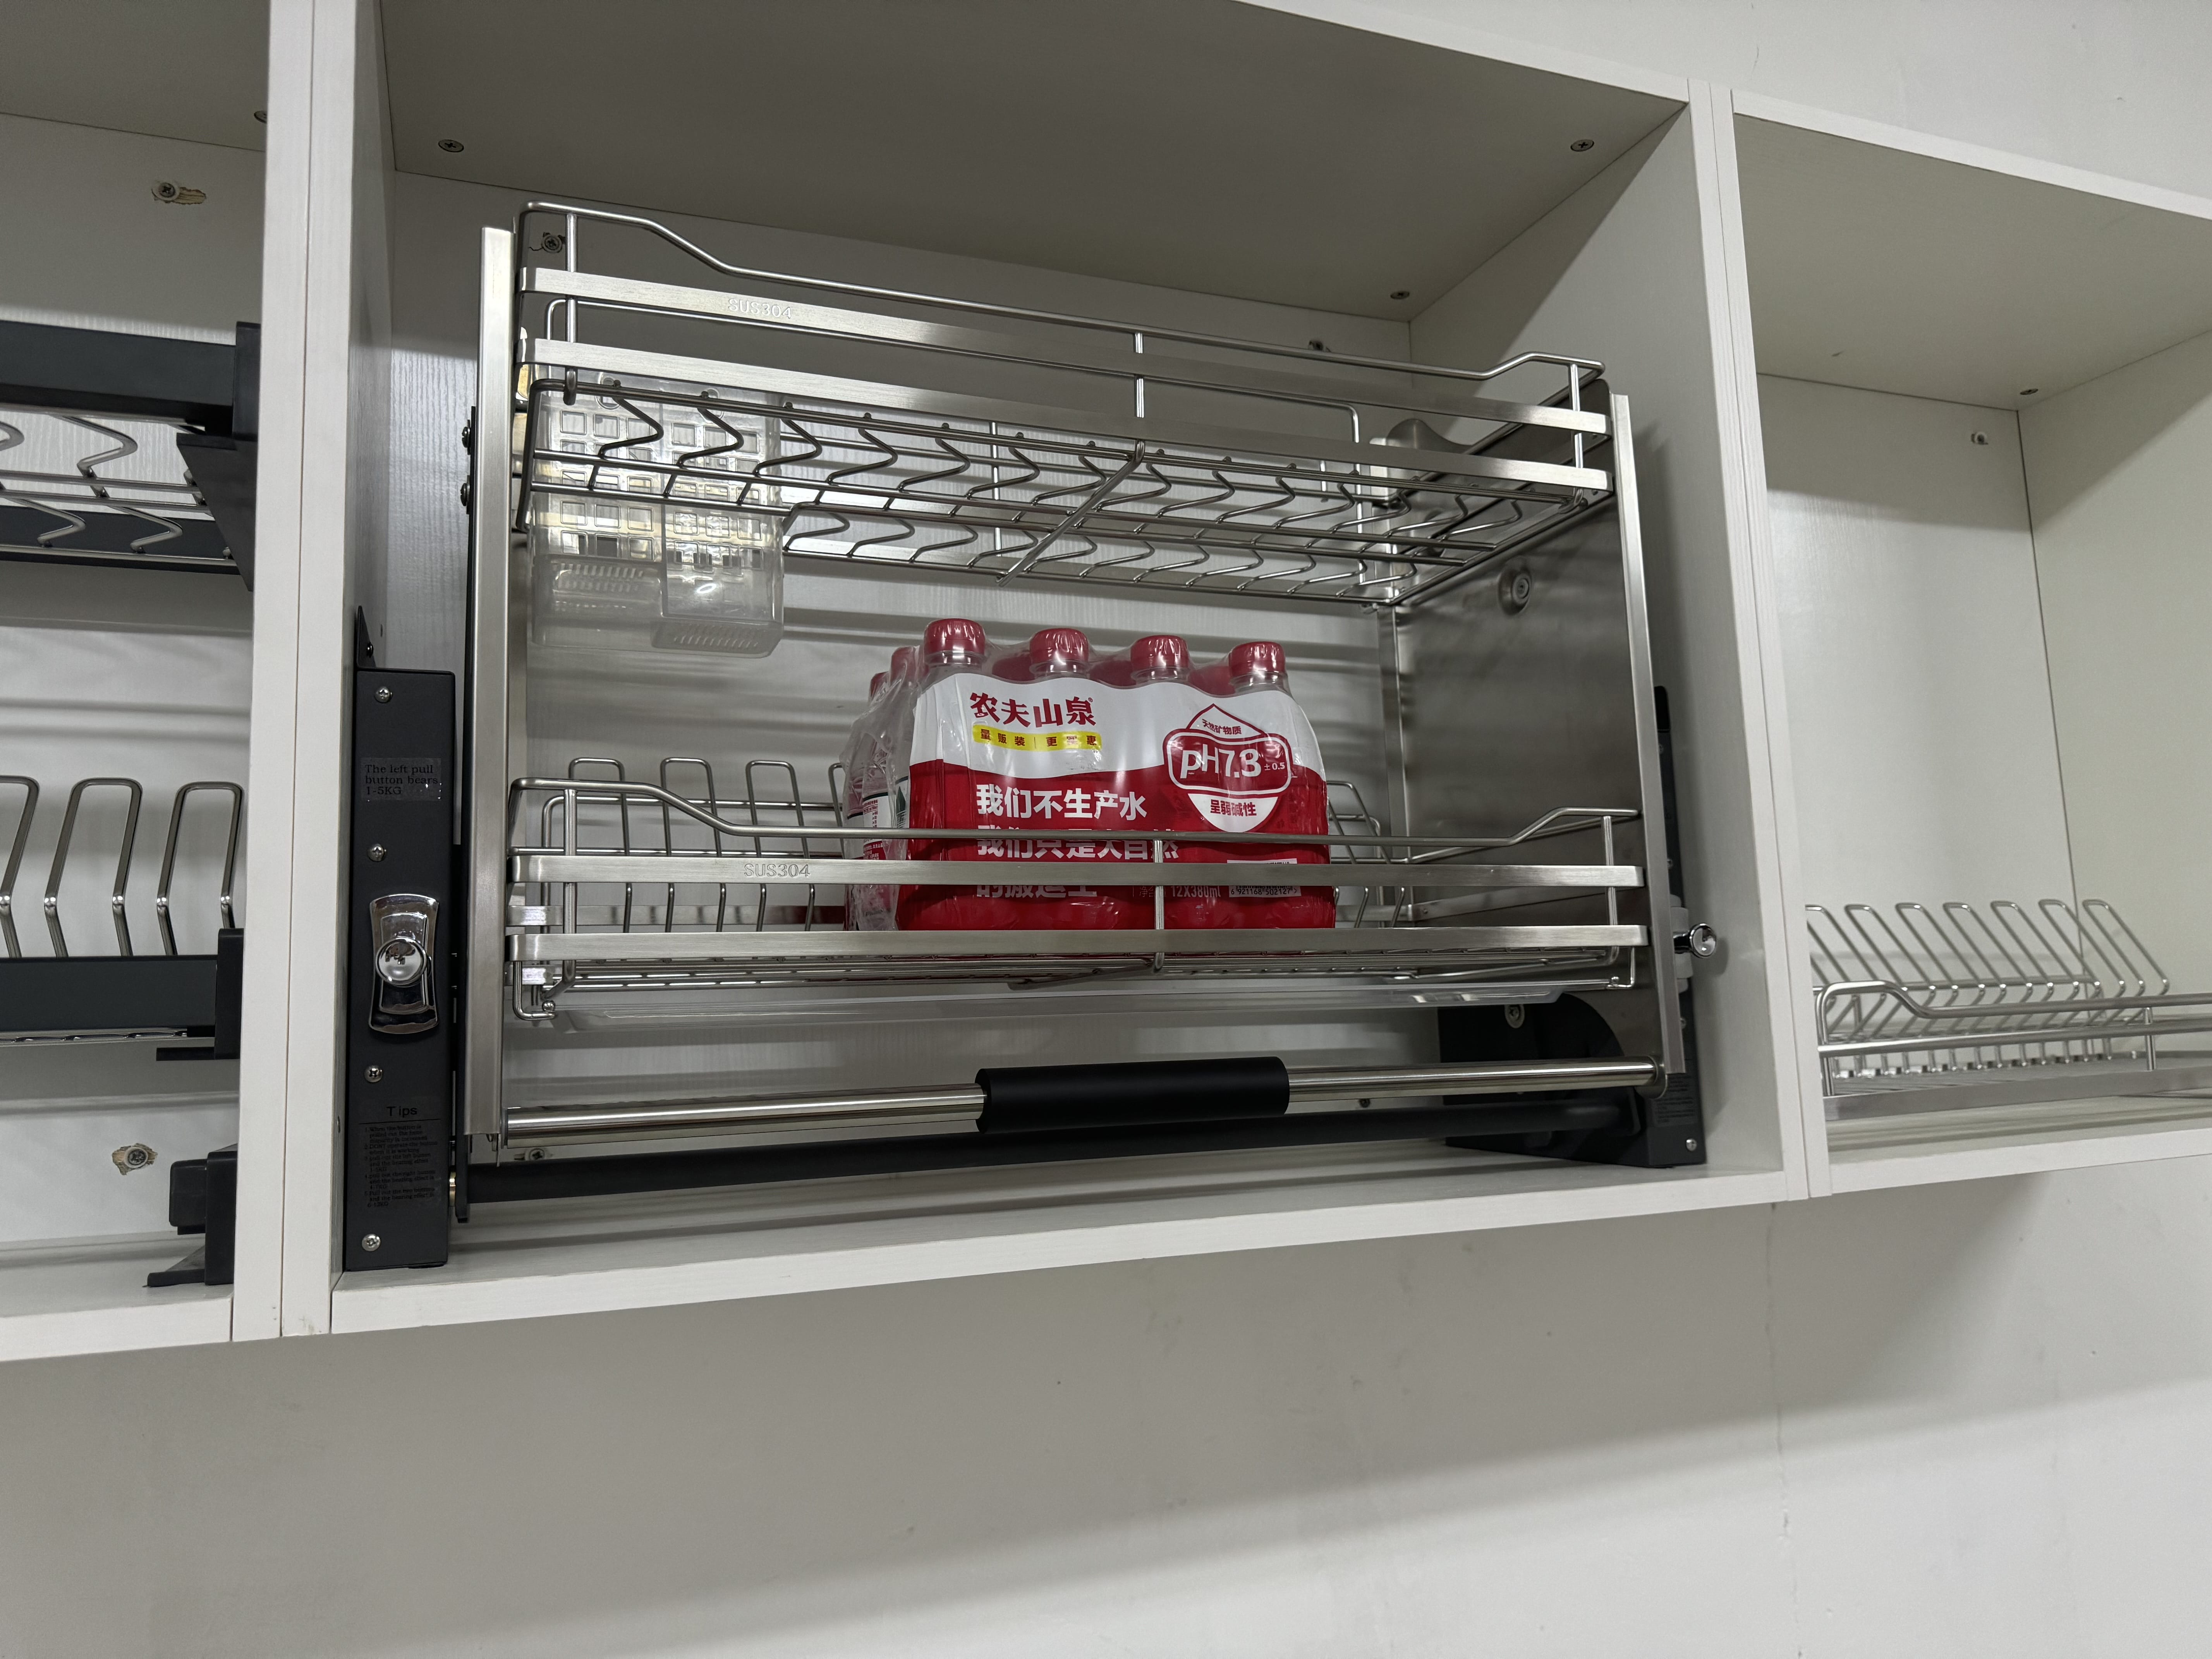 Improve Accessibility in Your Kitchen with the Pull Down Overhead Cabinet Organizer